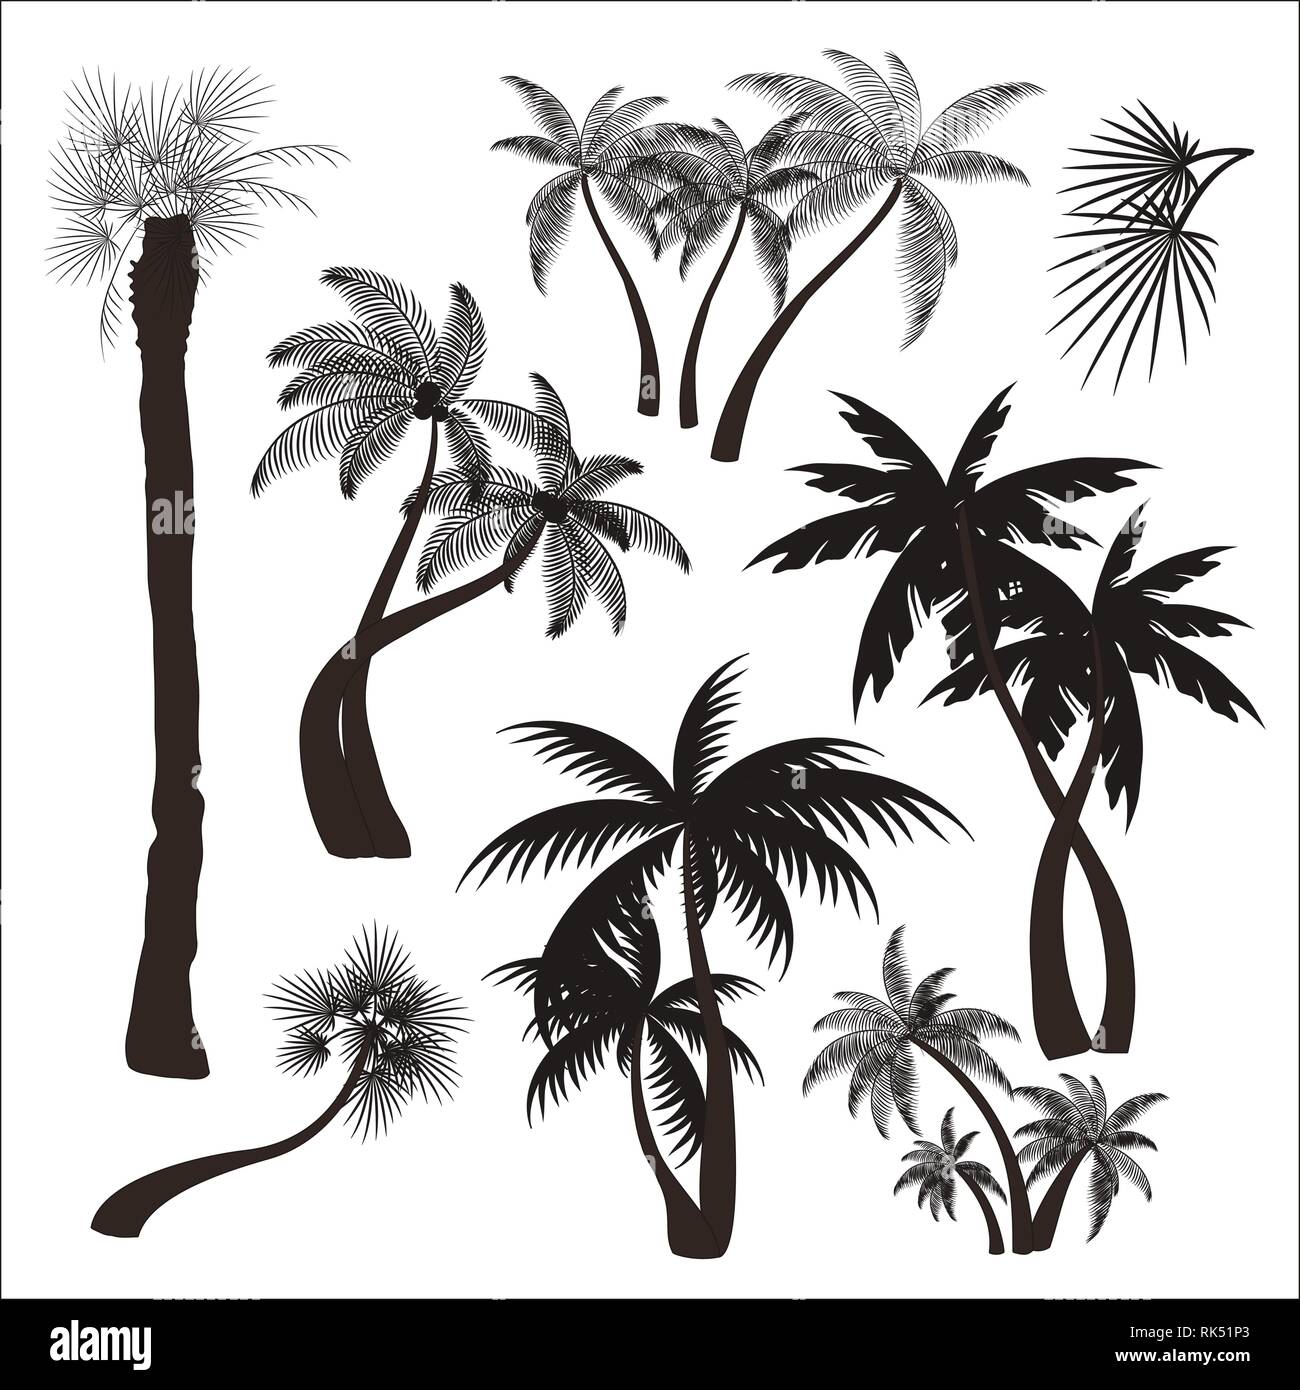 Palms trees collection. Vector illustration EPS 10 Stock Vector